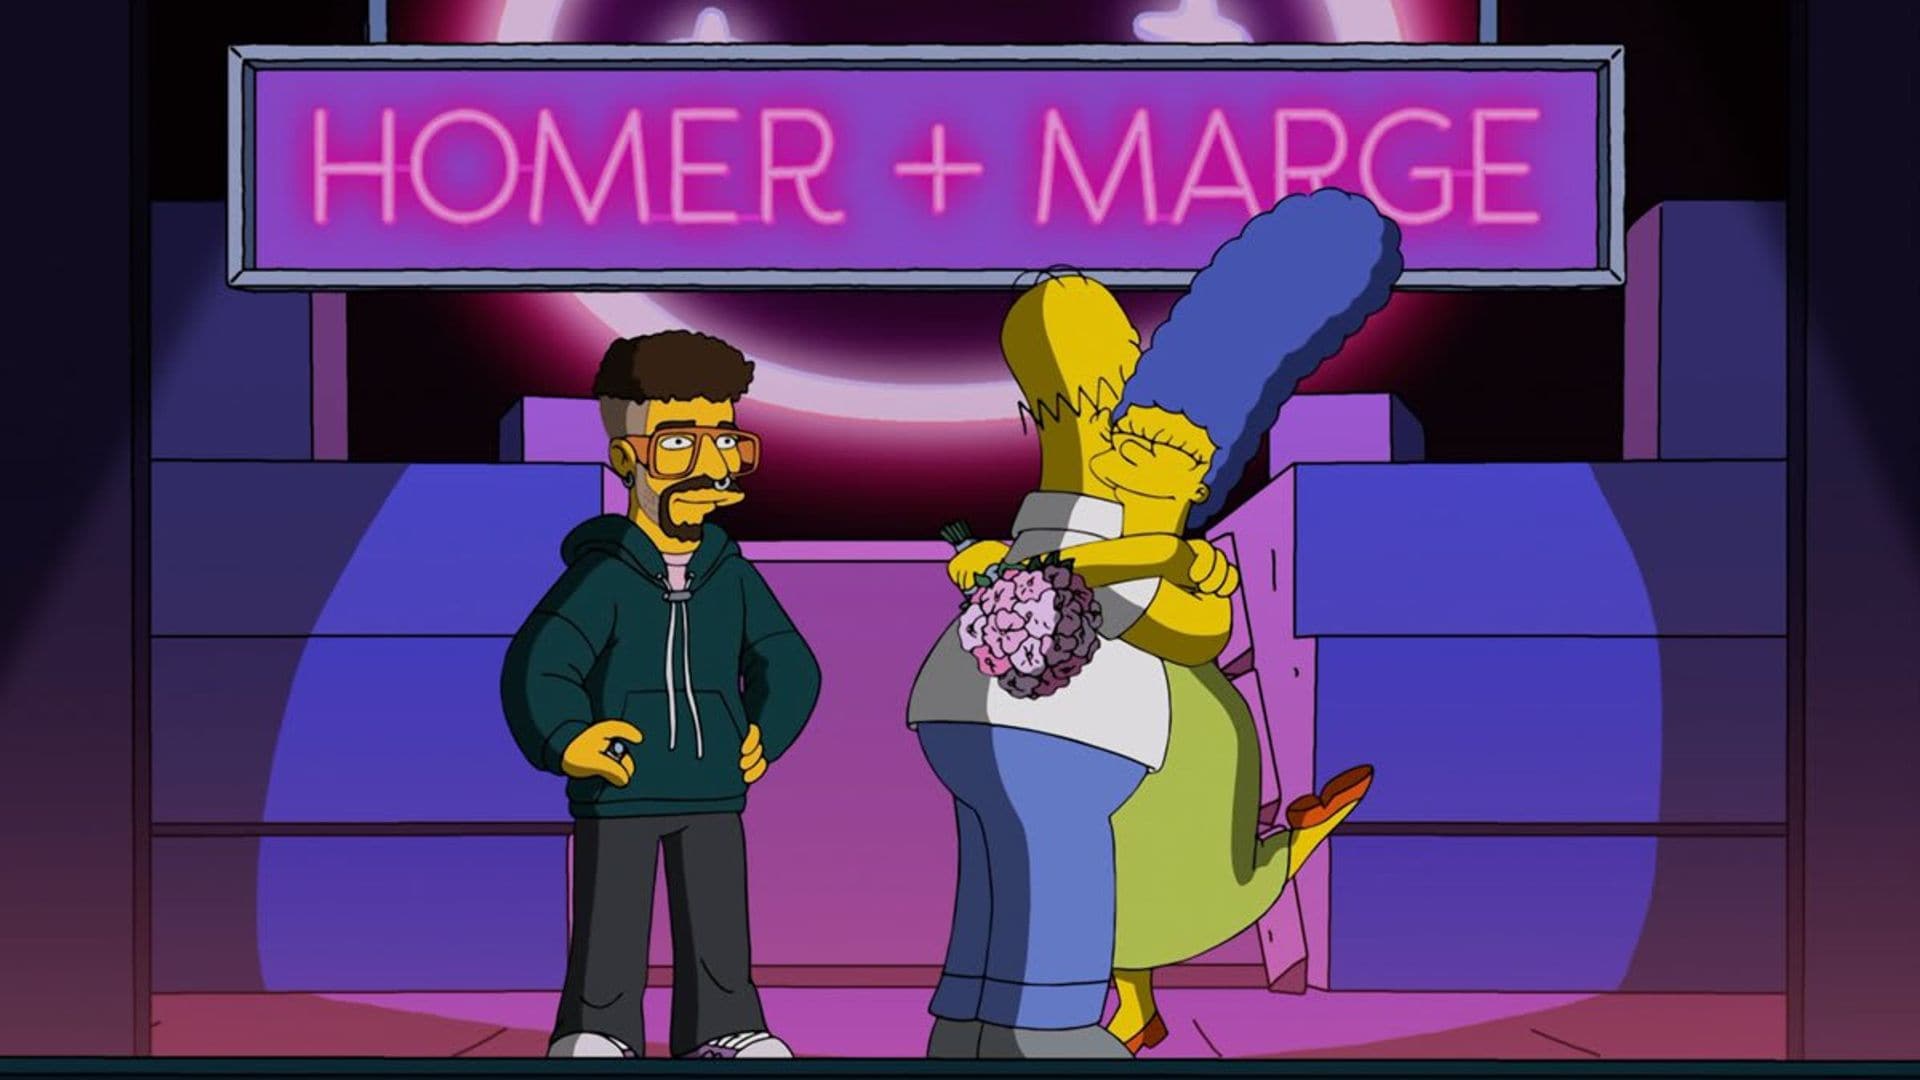 Bad Bunny plays matchmaker for Homer and Marge Simpson in new "Te Deseo lo Mejor" video